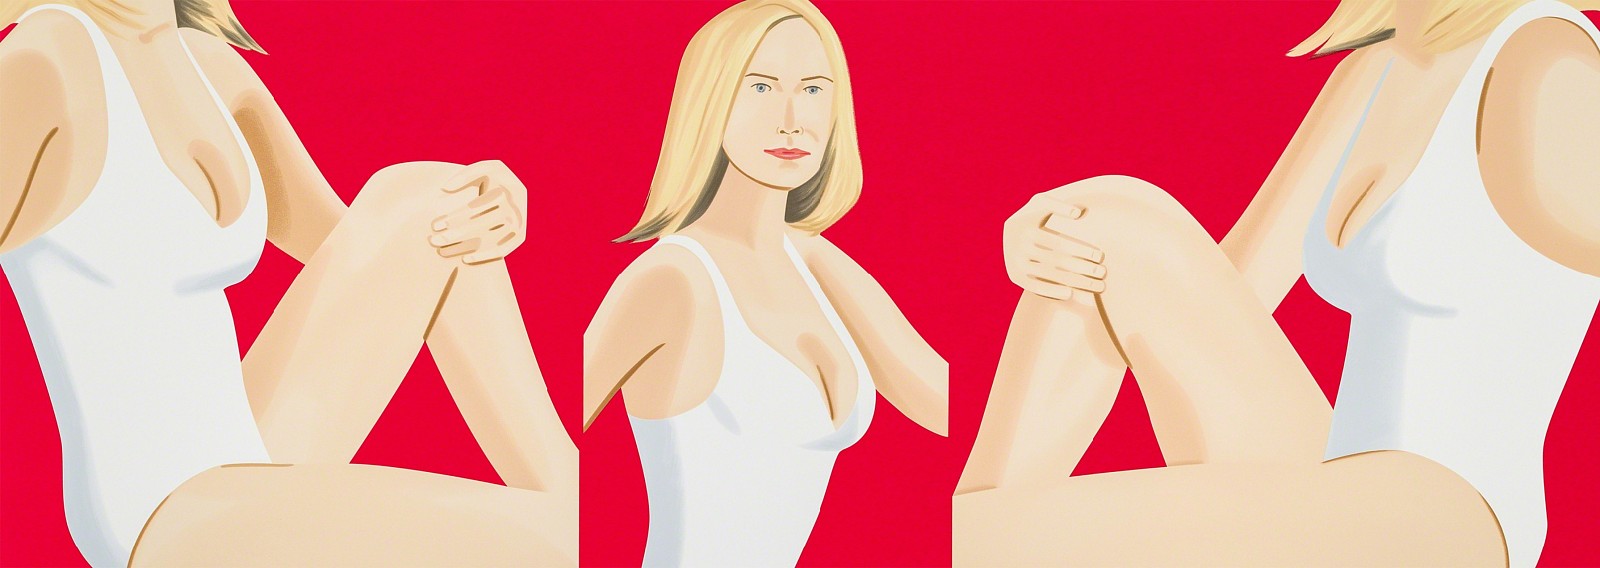 Alex Katz, NFS Coca-Cola Girls 9; edition 21/60, 2019
26-color silkscreen on Saunders Waterford High White HP 425 gsm fine art paper, 36 x 102 inches (paper) / 42.5 x 108.5 inches framed (+$3,500 frame)
KATZ00063